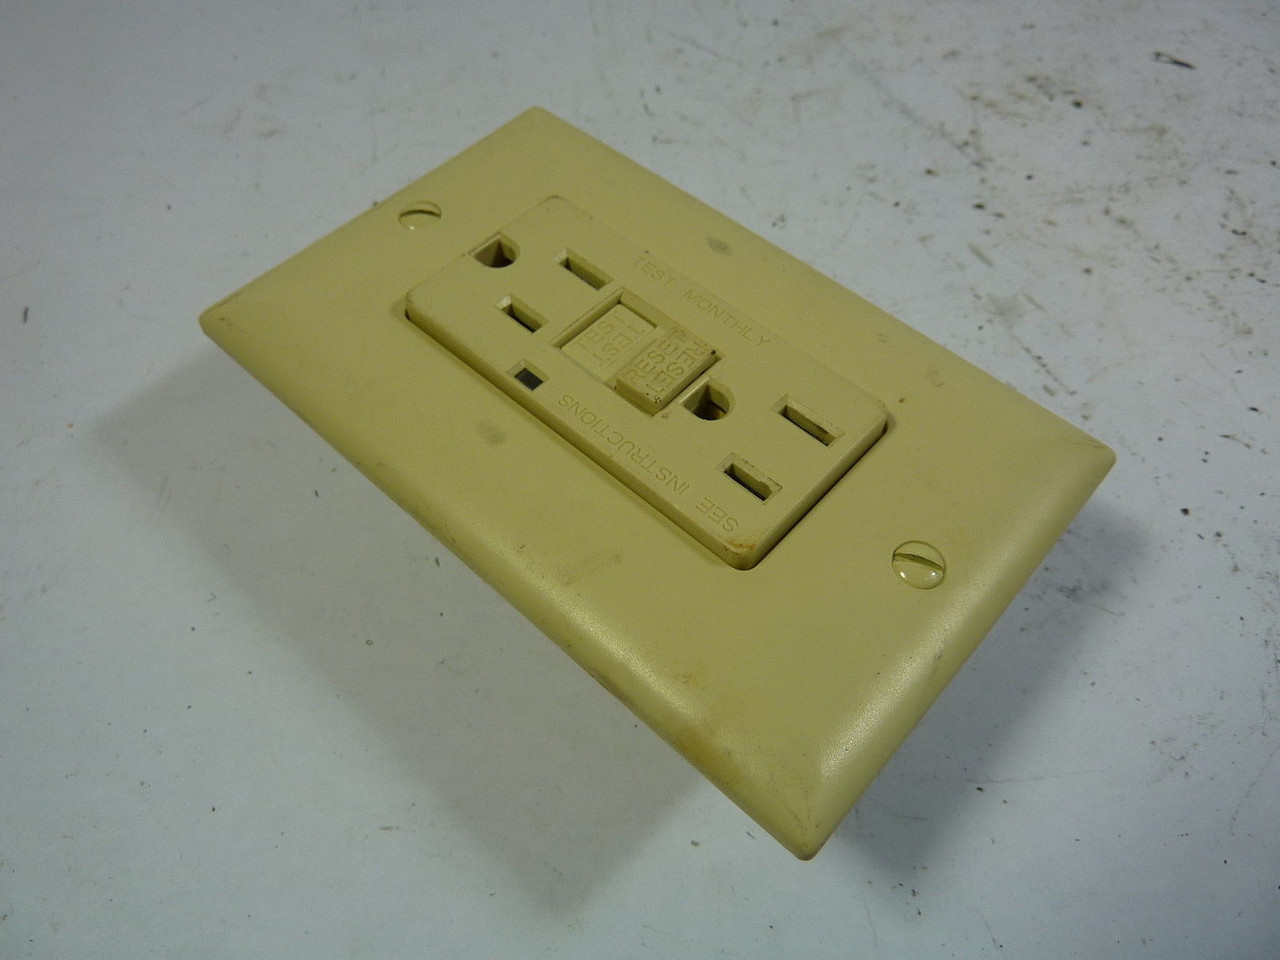 Pass Seymour B-389488 Receptacle 20 Amp 120V USED